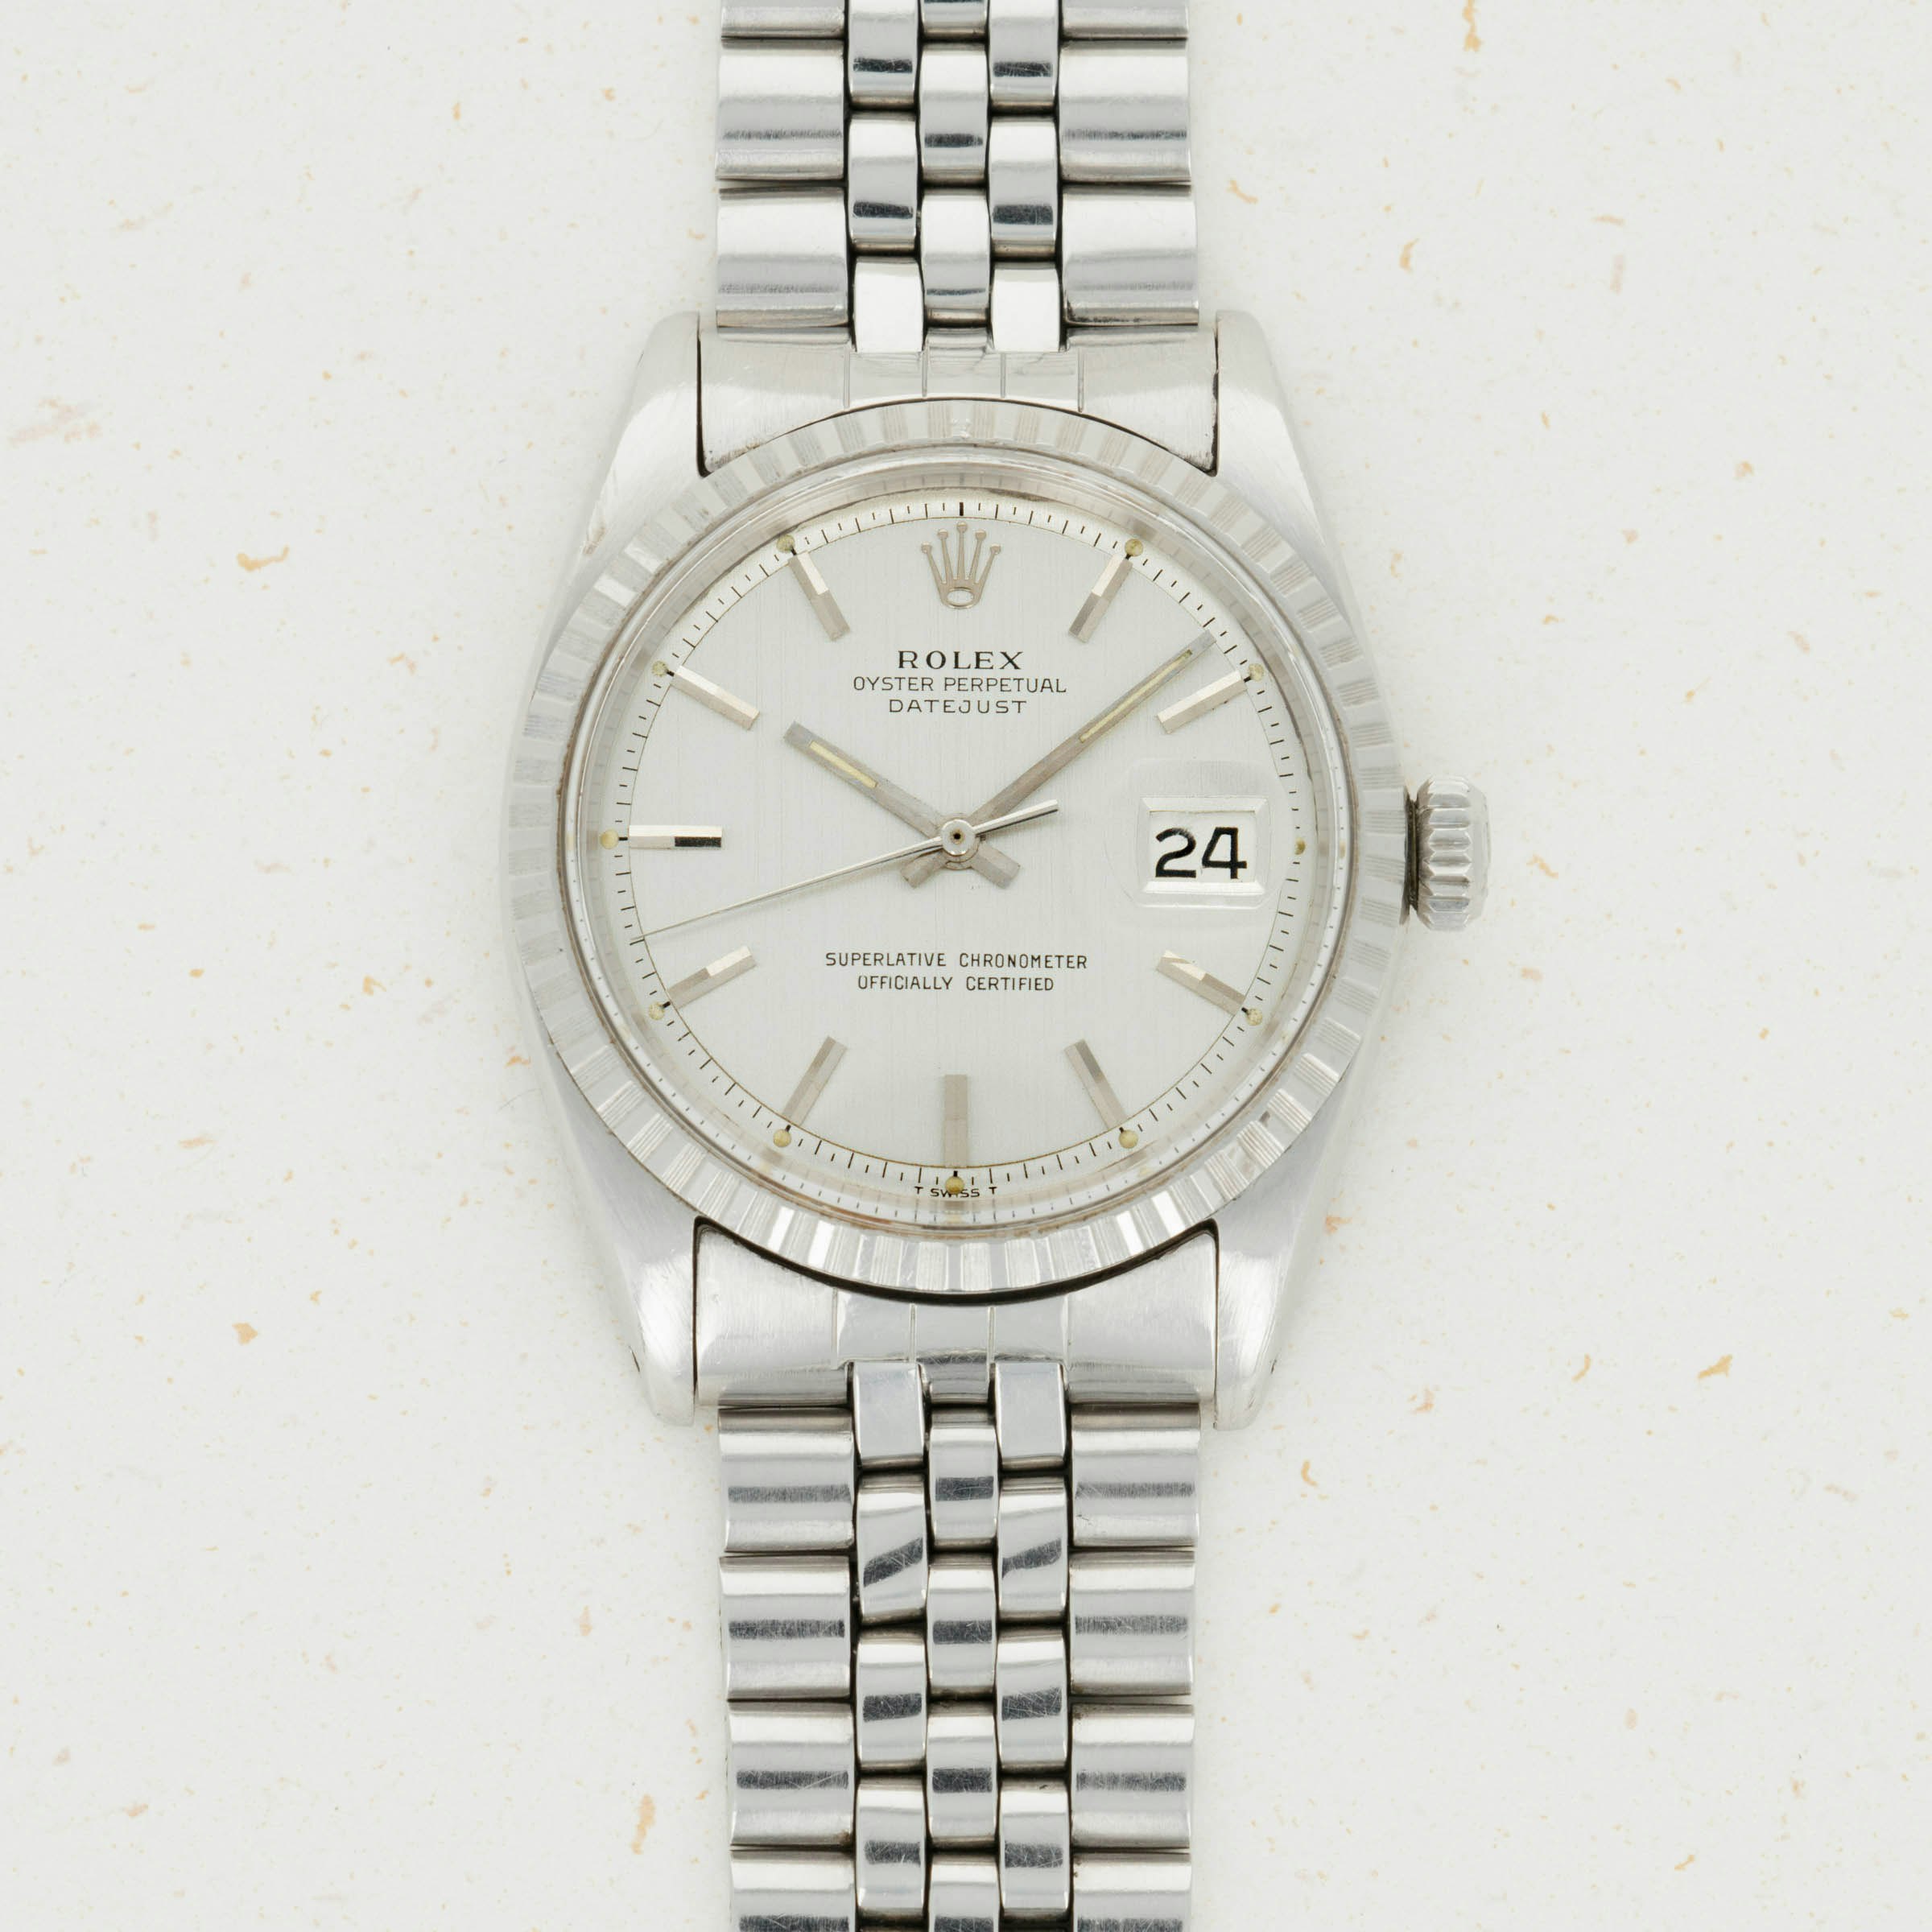 Thumbnail for Rolex Datejust 1603